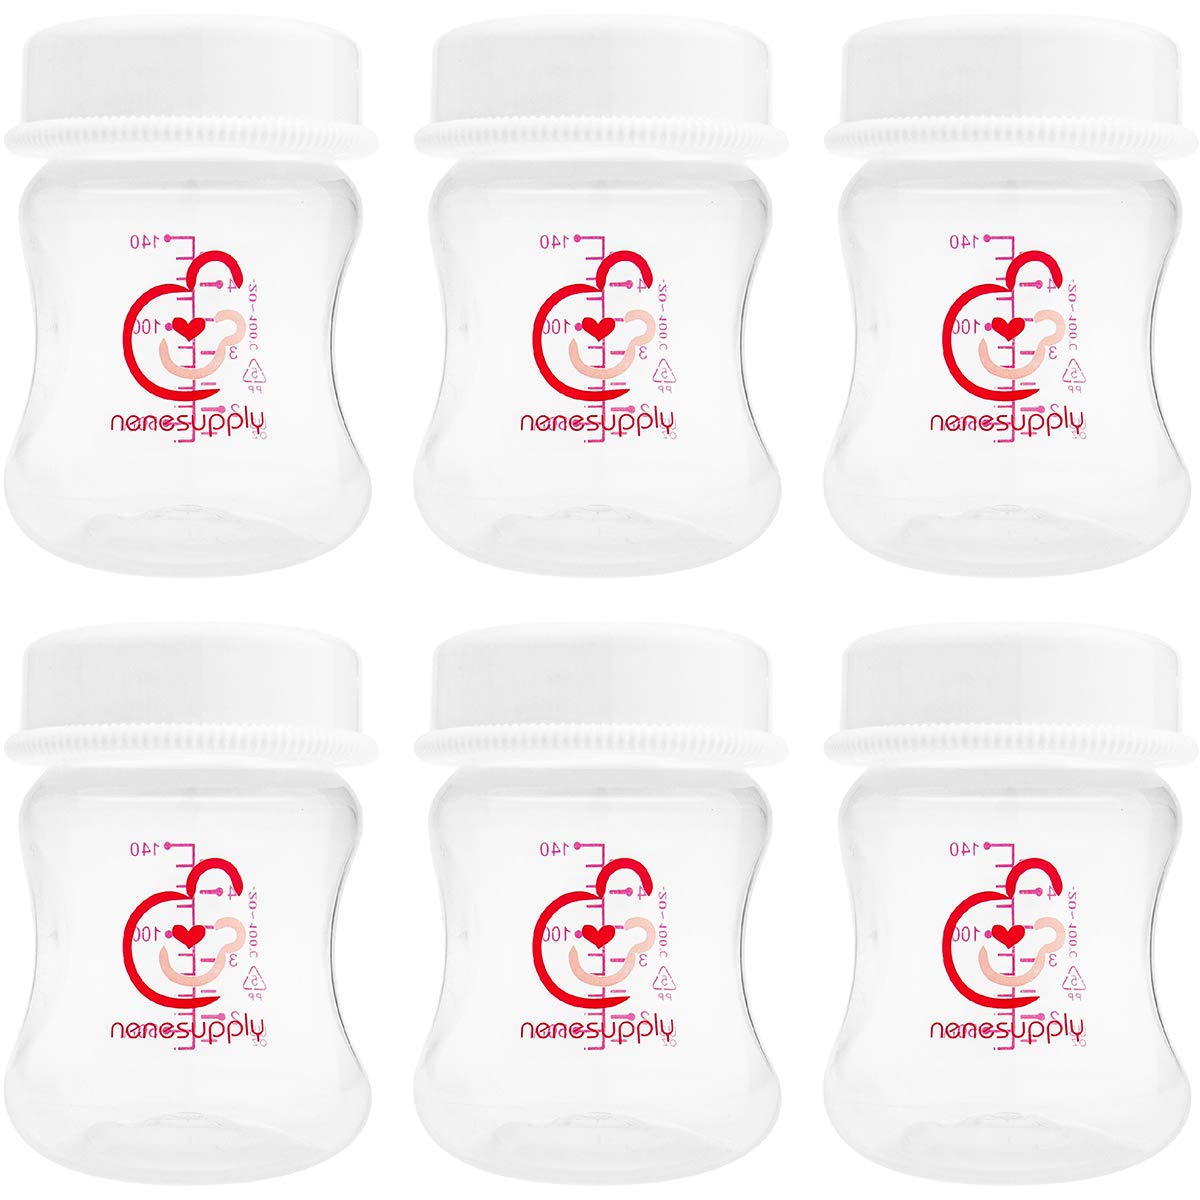 Book Cover Nenesupply 4.7oz Wide Neck Breast Pump Bottles Use as Bottles for Pumping with Spectra S1 Spectra S2 Breast Pumps. Pump Bottles for Spectra Pump. Breastmilk Storage and Collection Bottles (Pack of 6) 4.7 Ounce (Pack of 6)